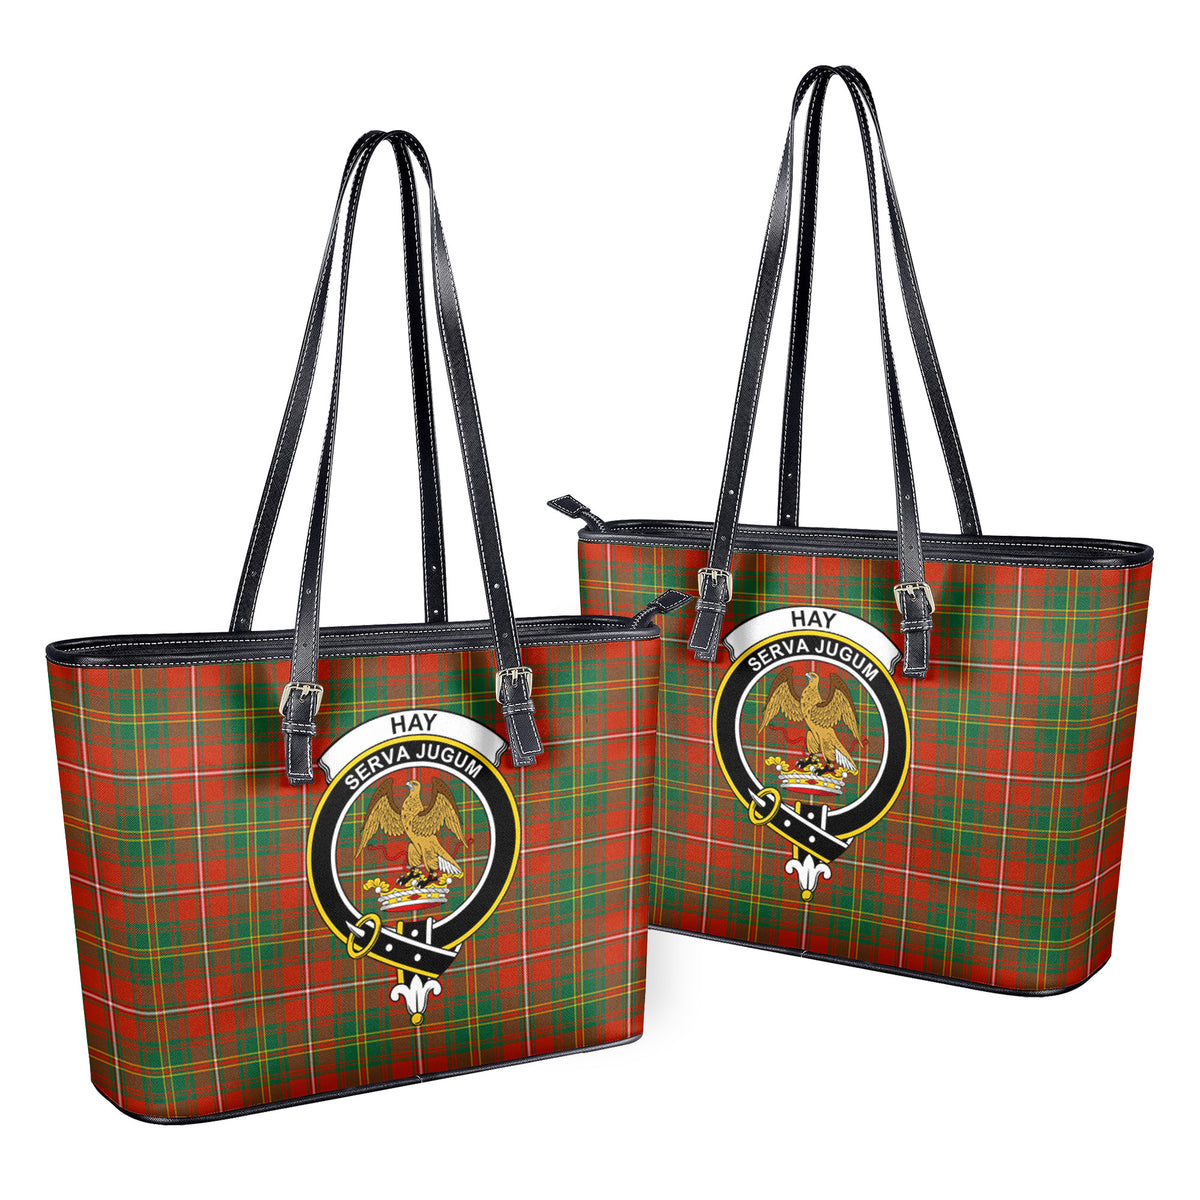 Hay Ancient Tartan Crest Leather Tote Bag